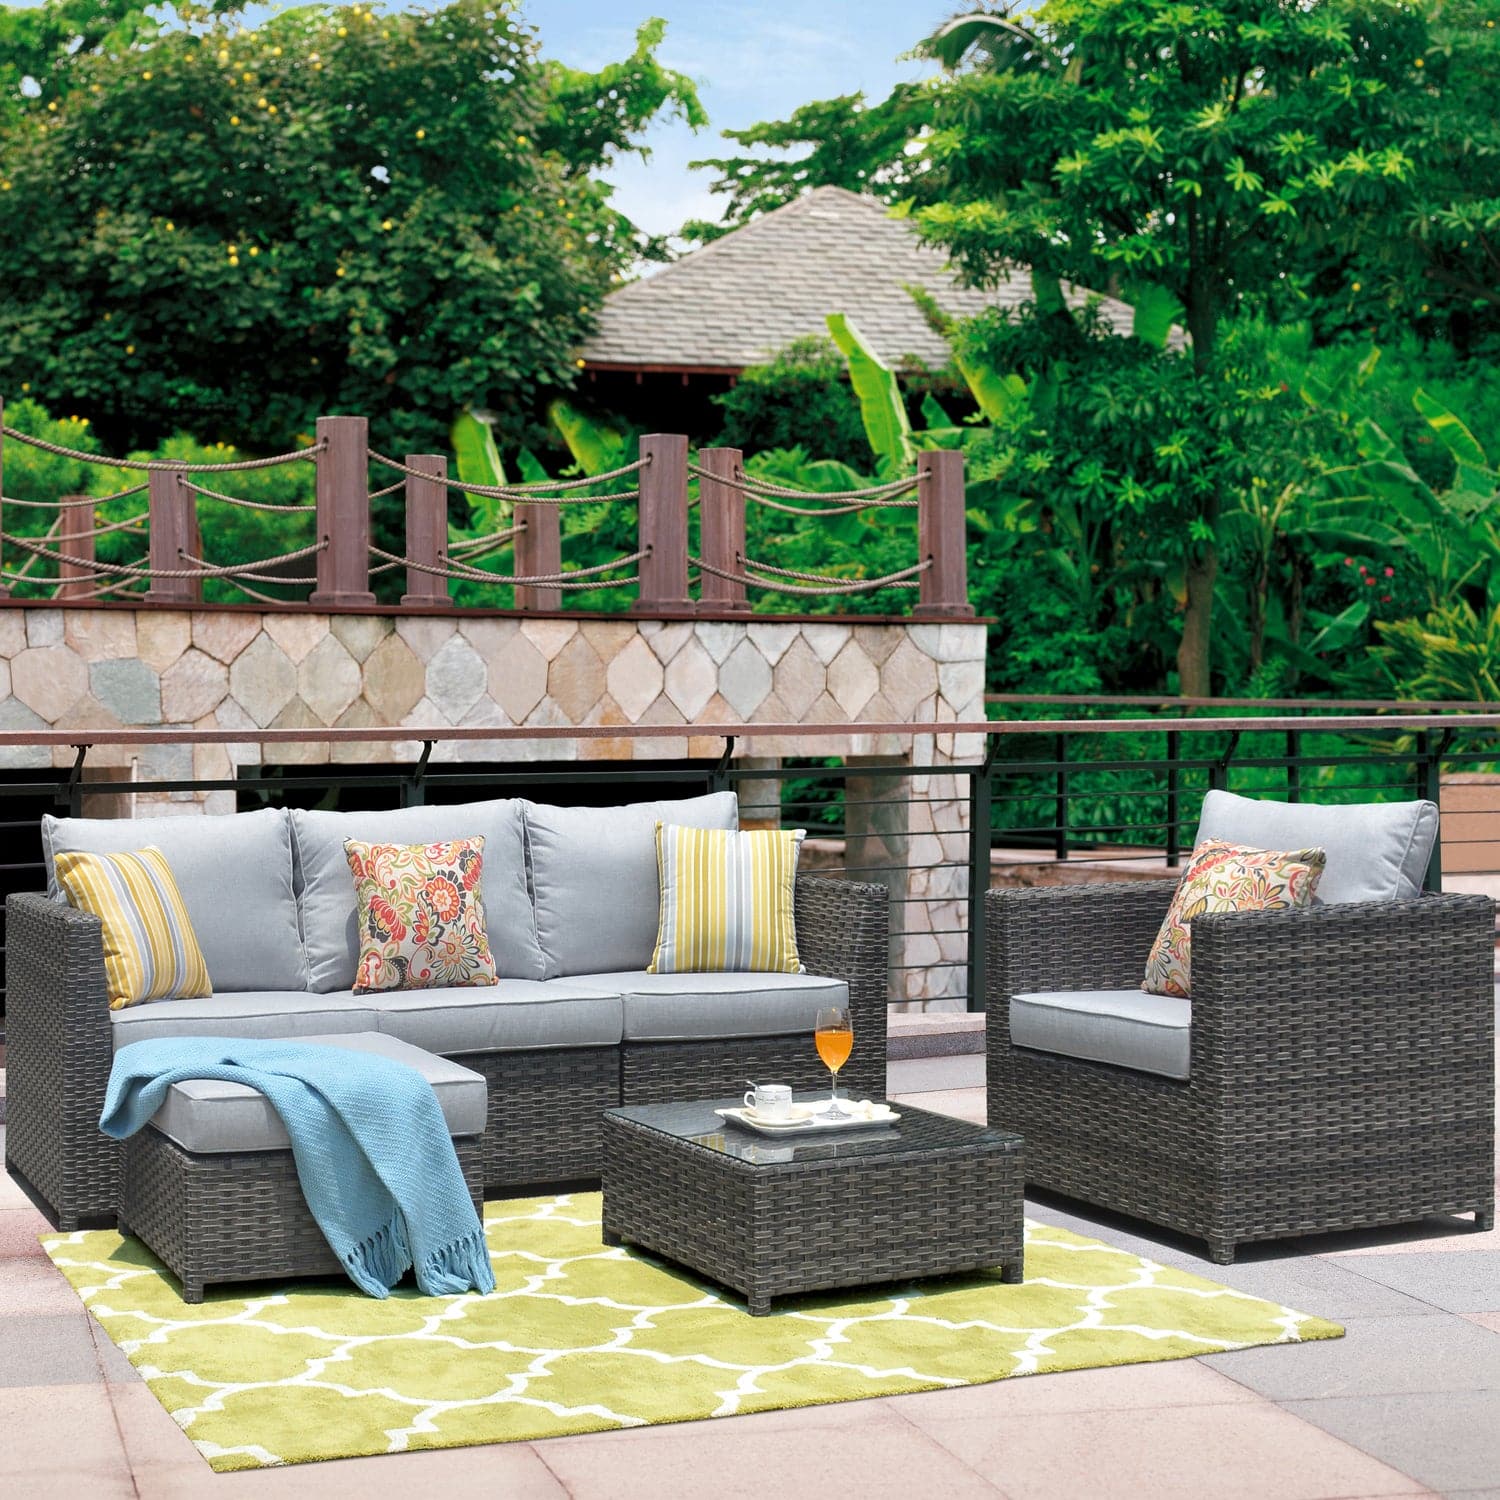 Ovios Patio Furniture Set Bigger Size 6-Piece, King Series, Fully Assembled